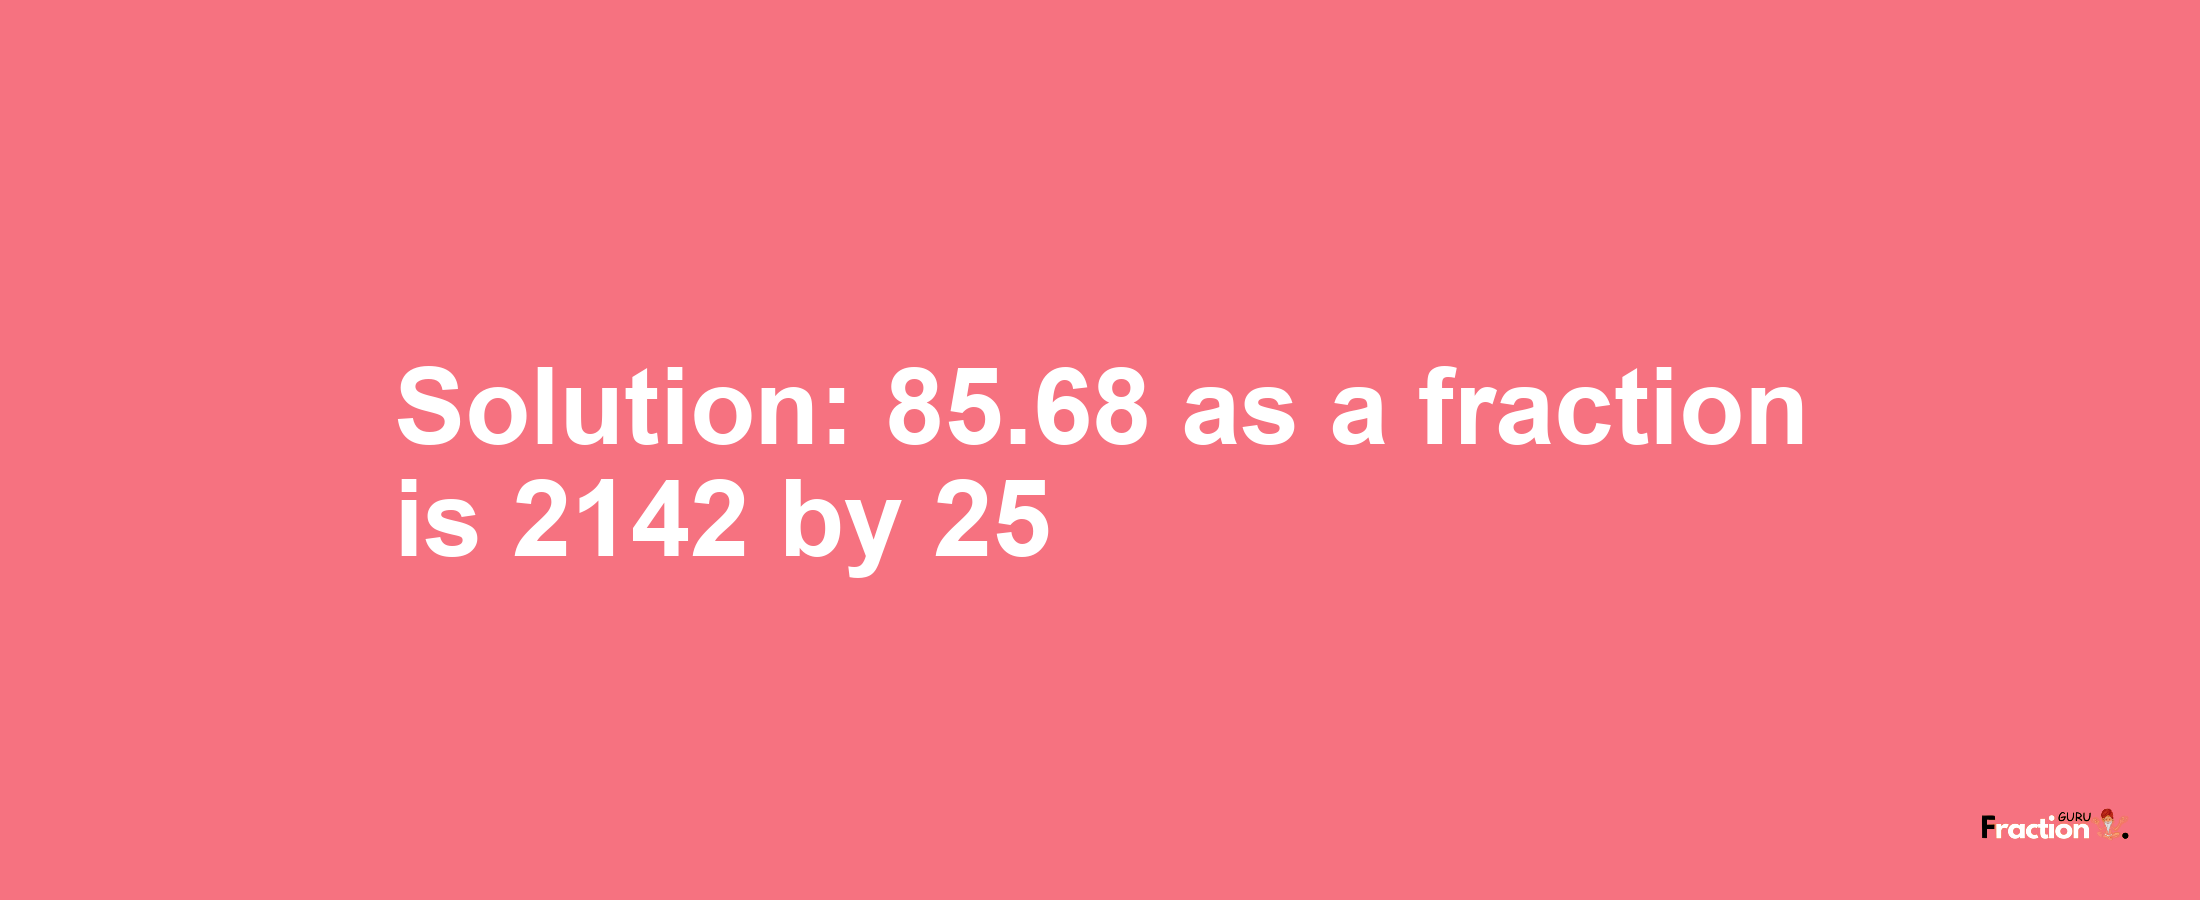 Solution:85.68 as a fraction is 2142/25